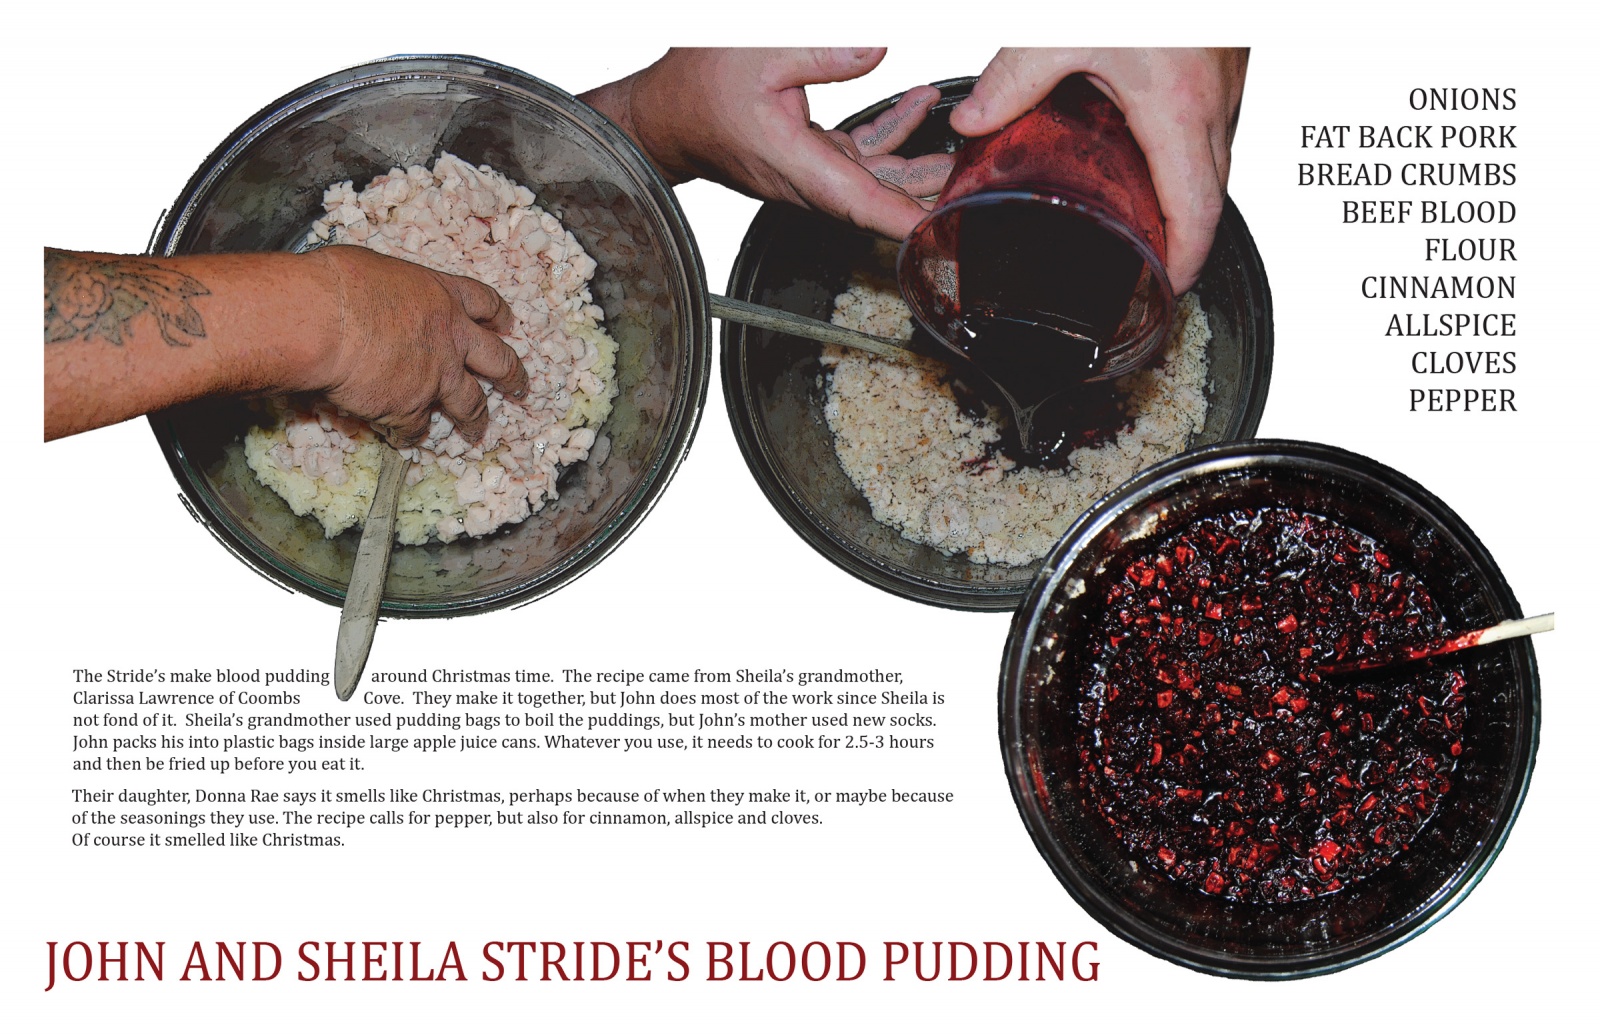 John and Sheila Stride’s Blood Pudding